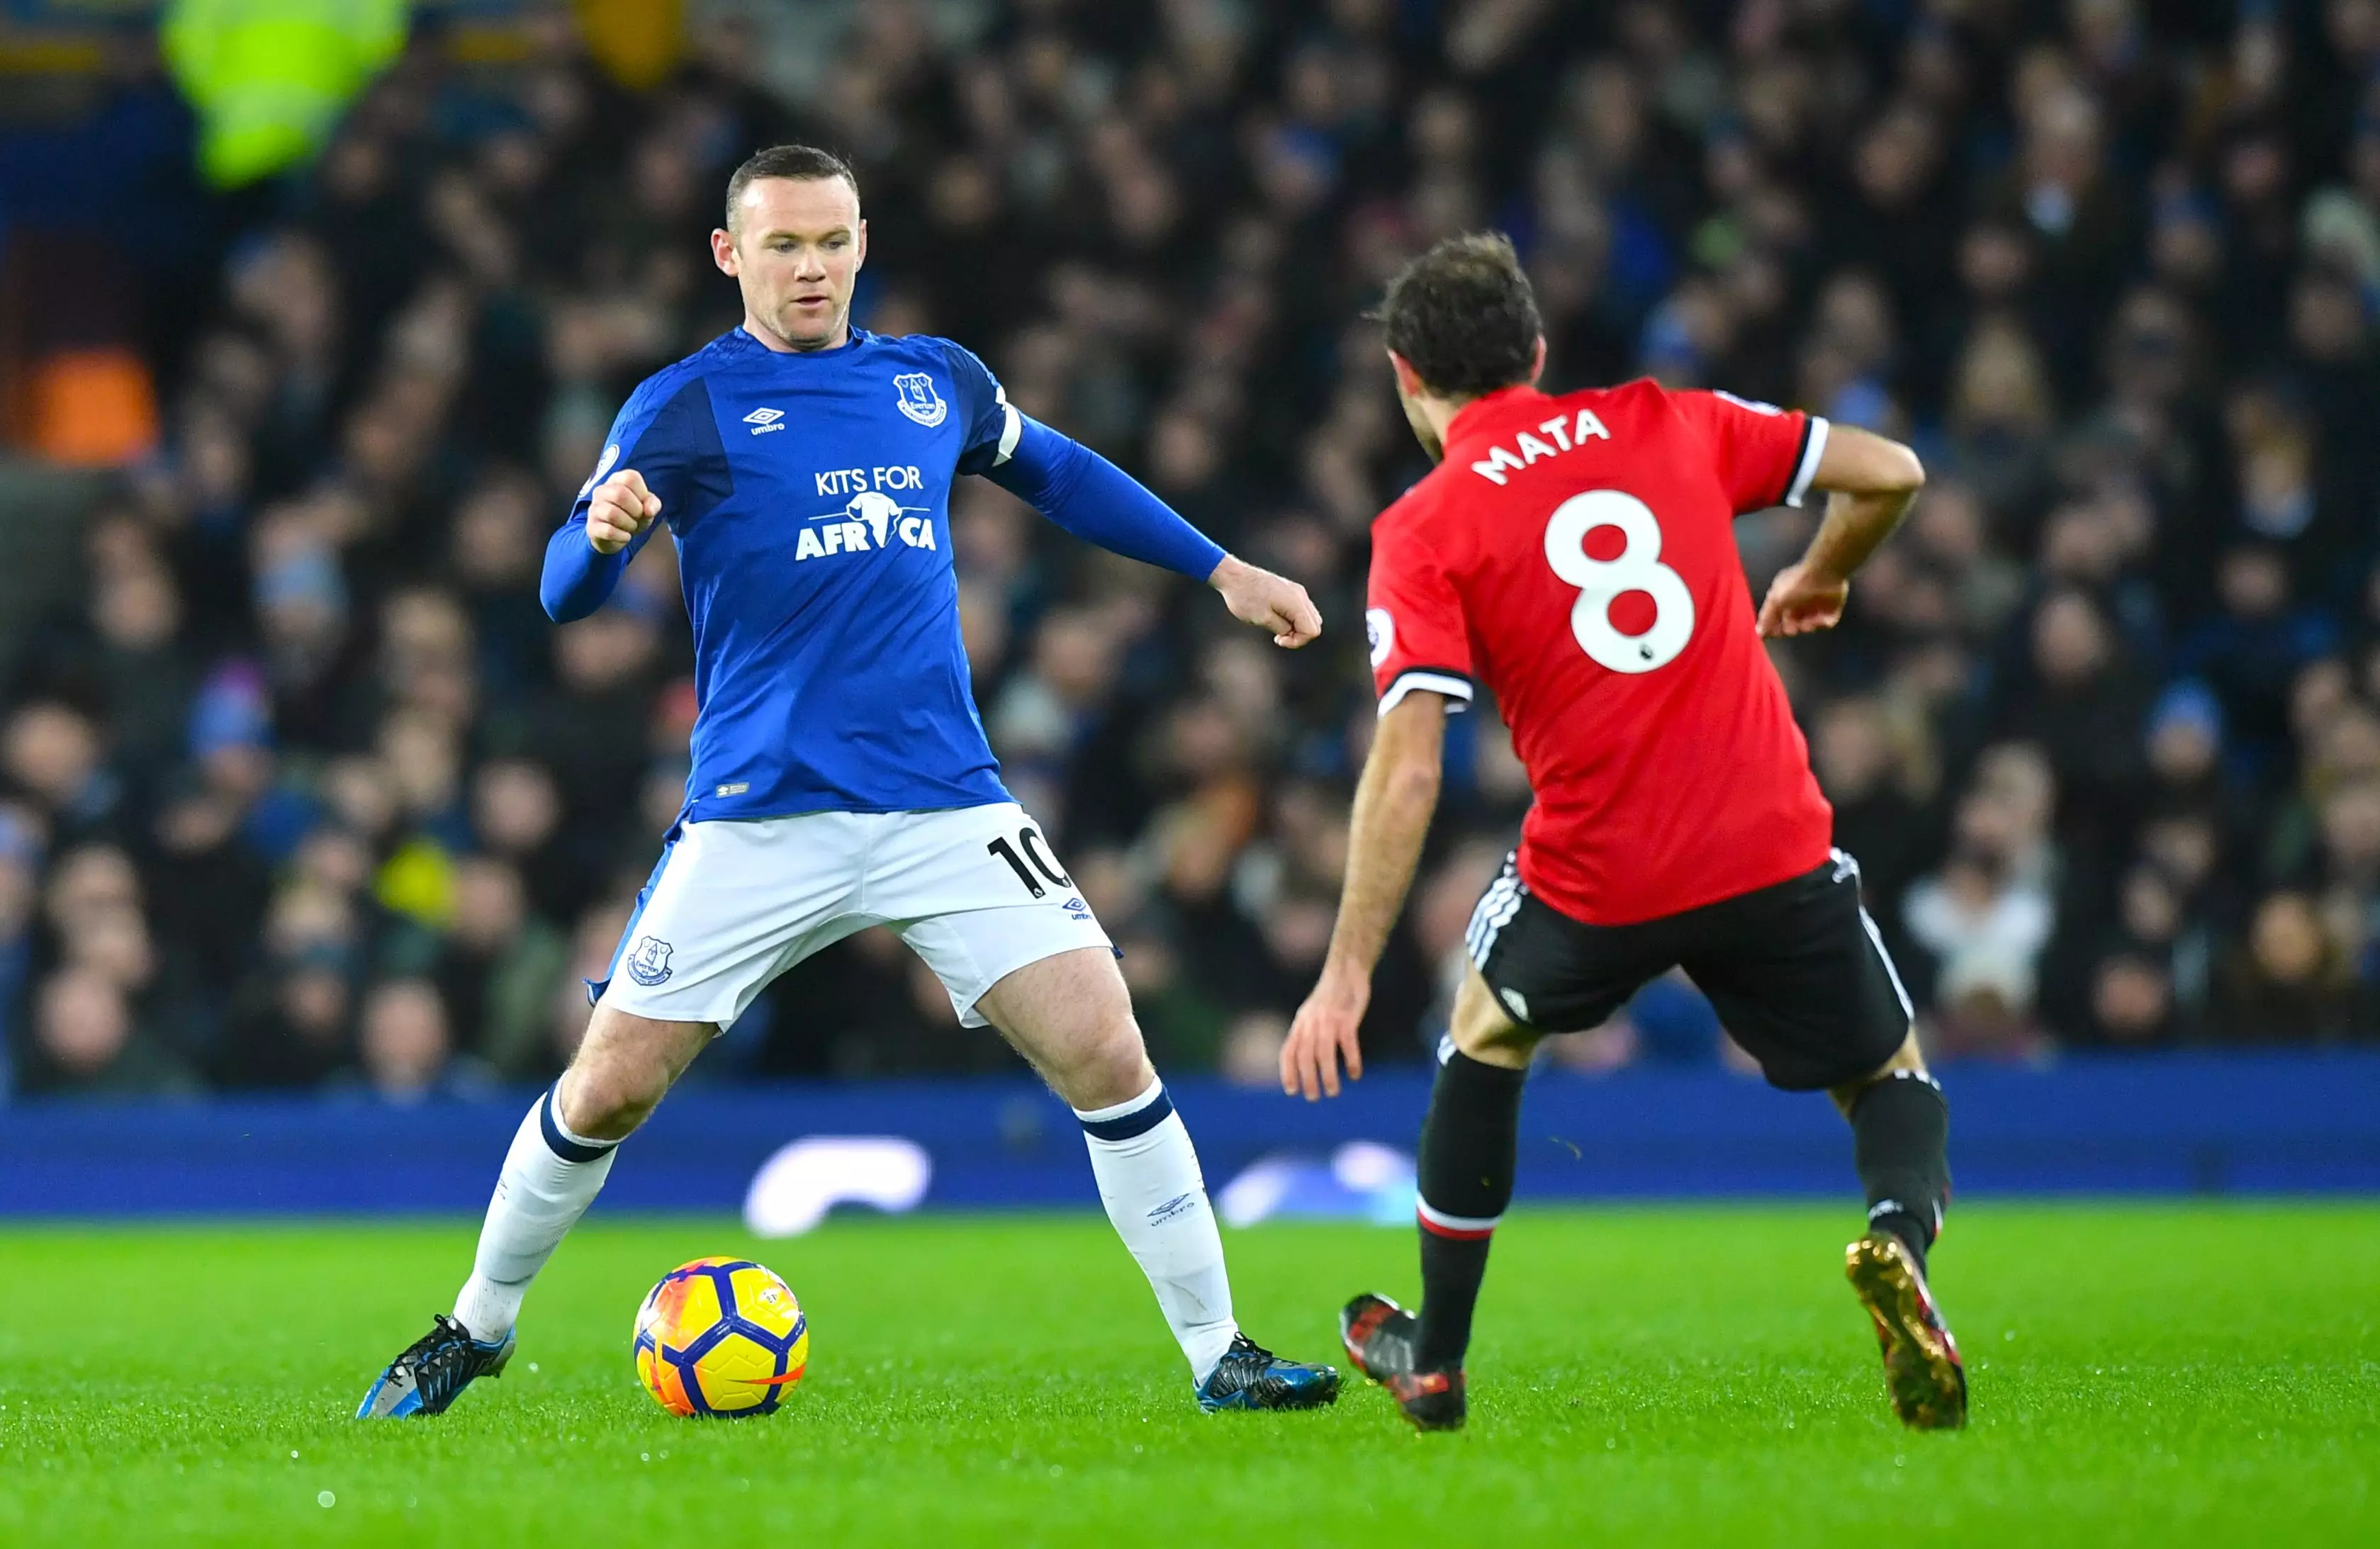 Rooney in action for Everton against United. Image: PA